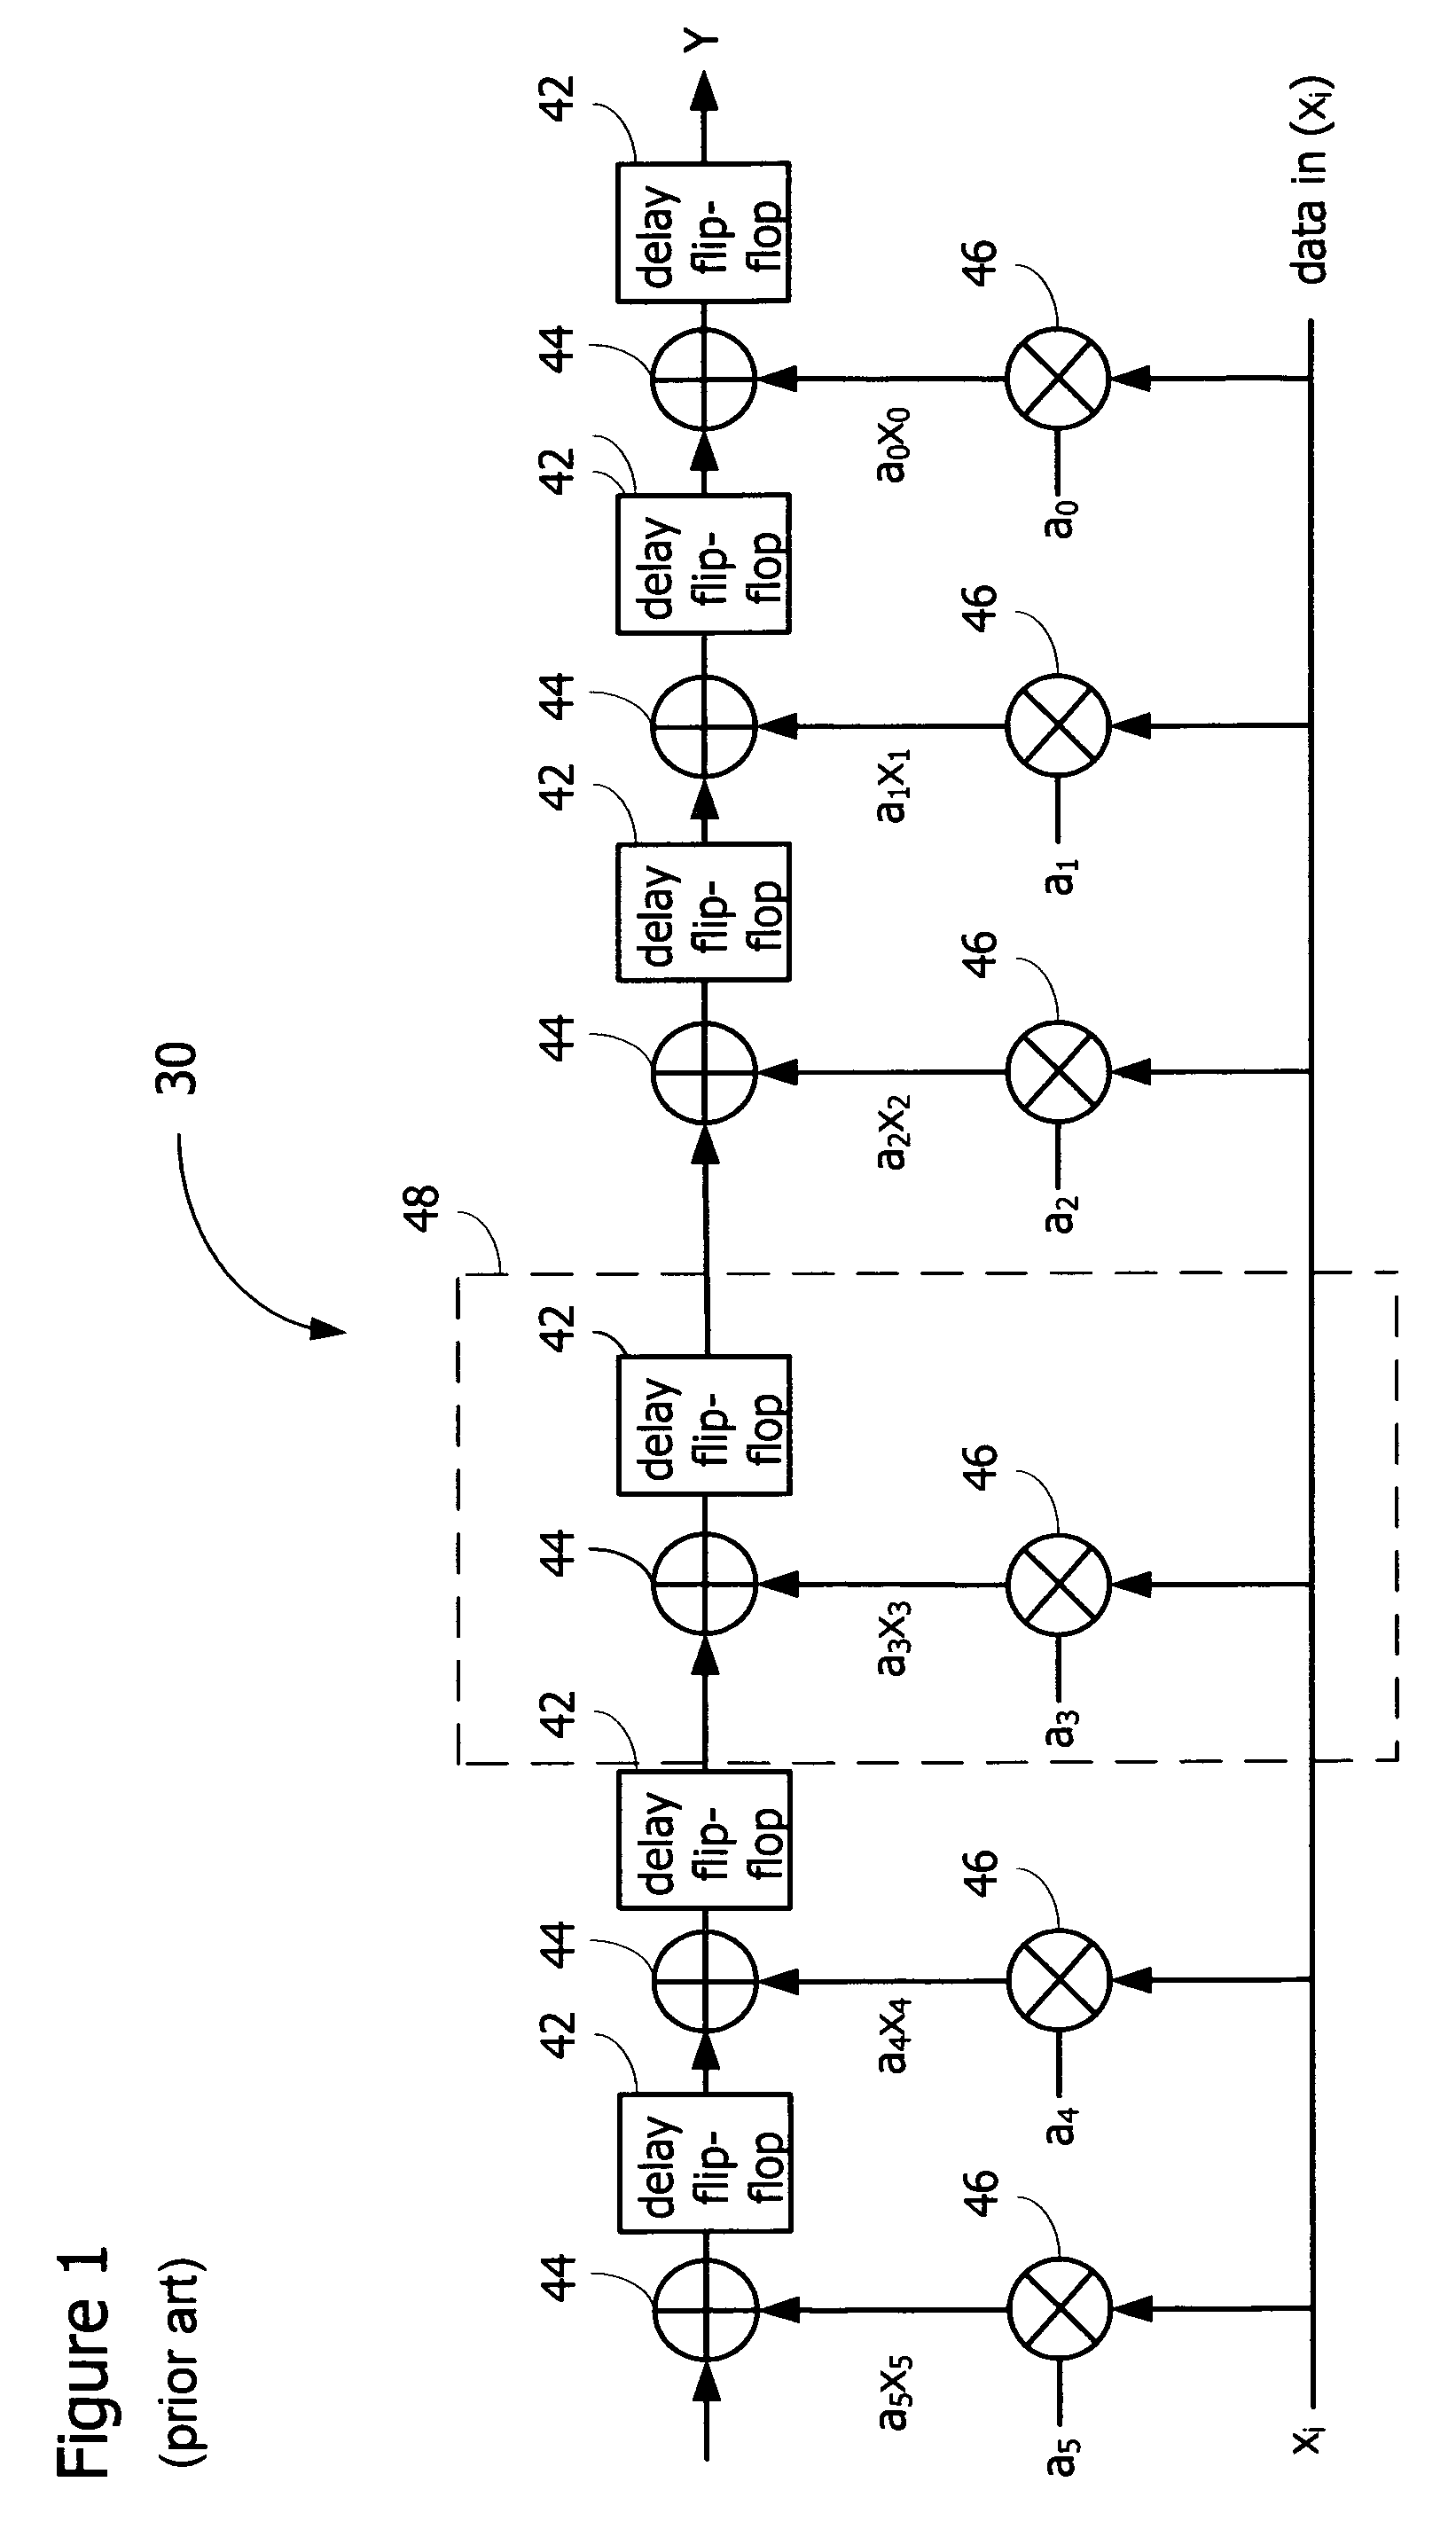 Transmitter architecture for high-speed communications